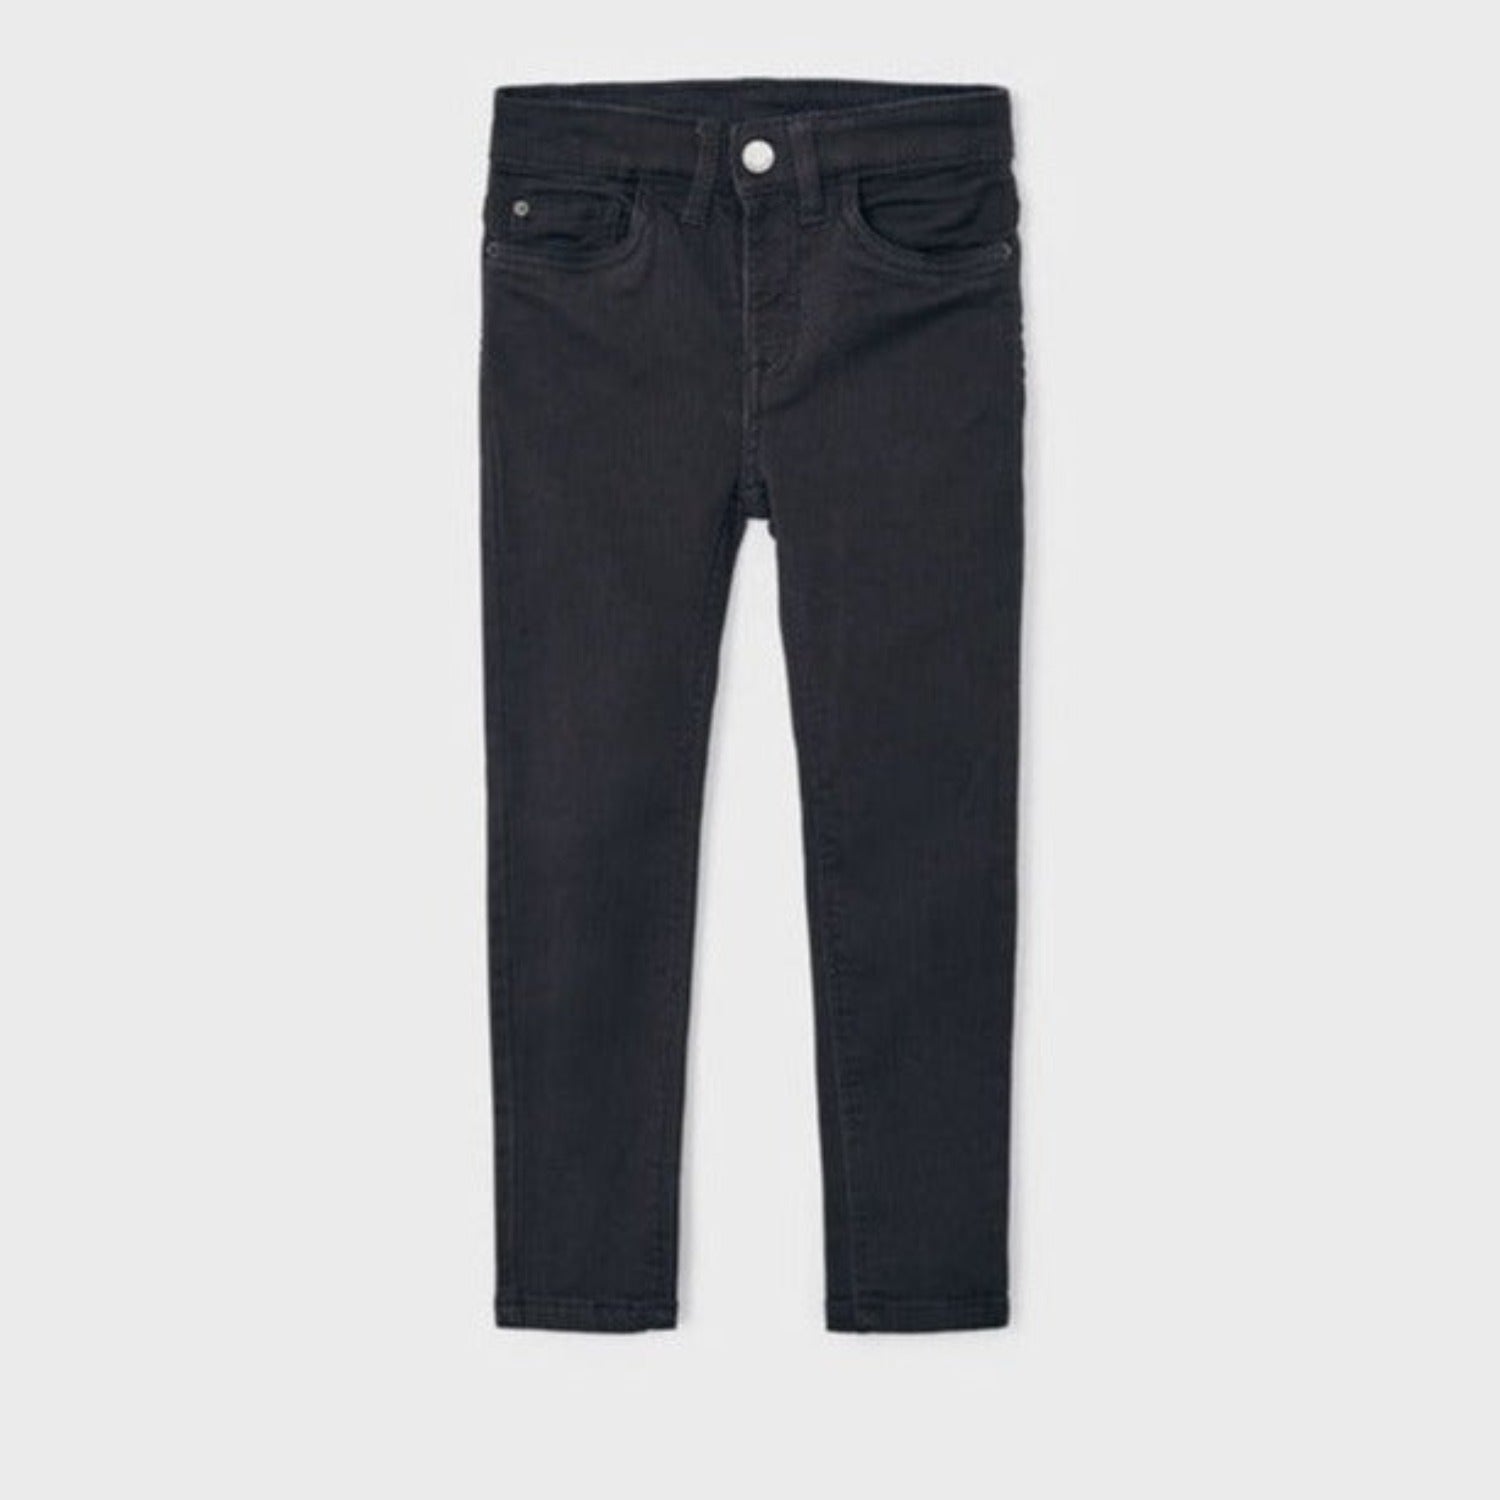 Soft & Stretchy Slim Fit Jeans